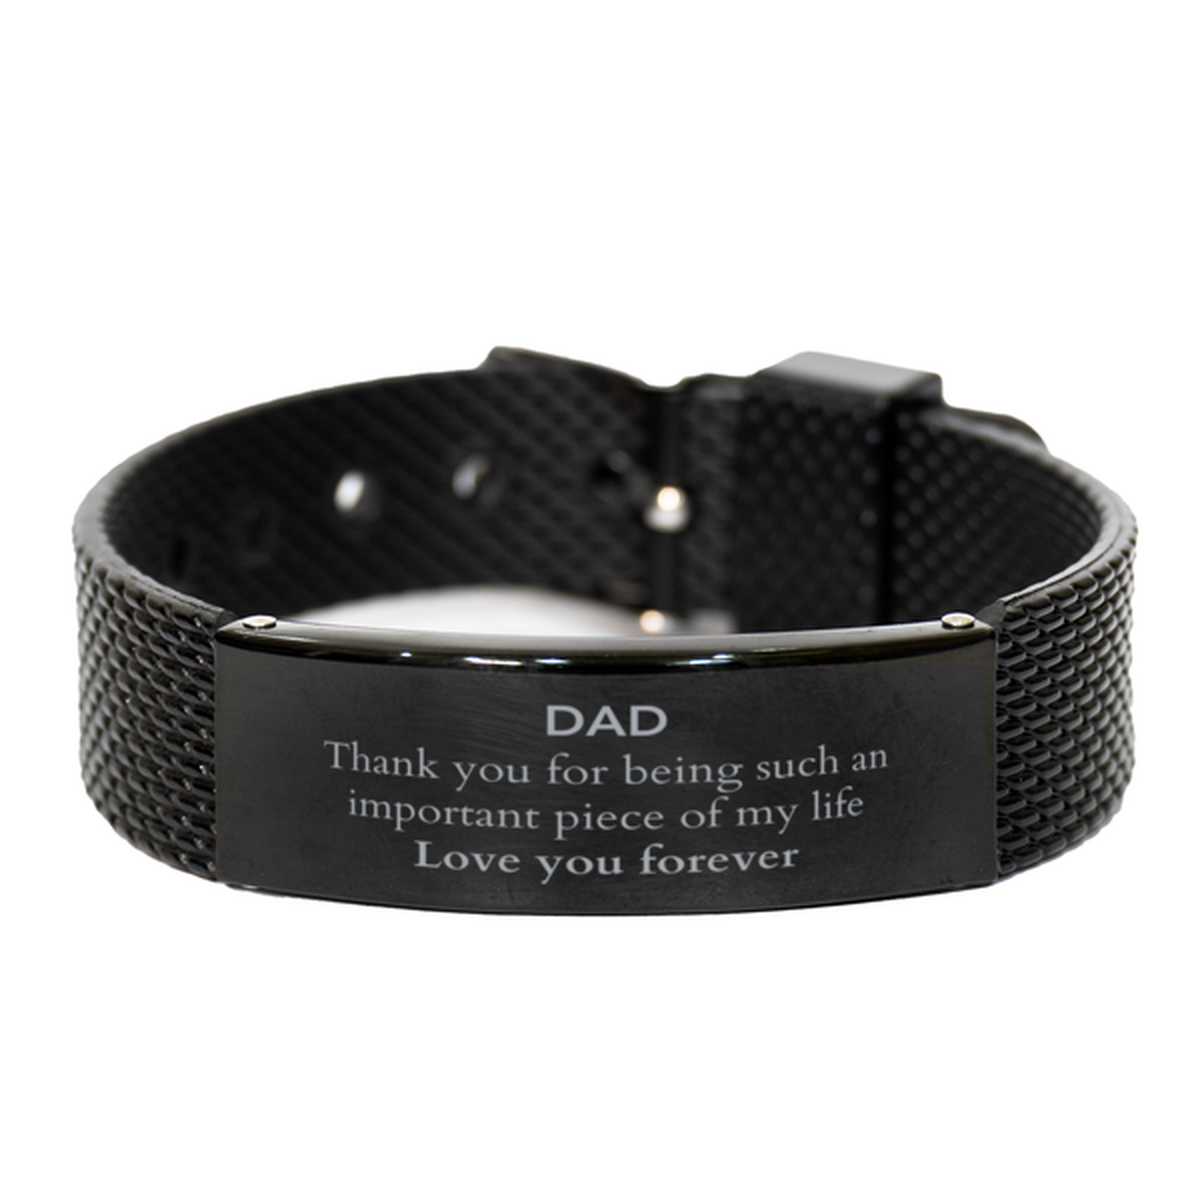 Appropriate Dad Black Shark Mesh Bracelet Epic Birthday Gifts for Dad Thank you for being such an important piece of my life Dad Christmas Mothers Fathers Day